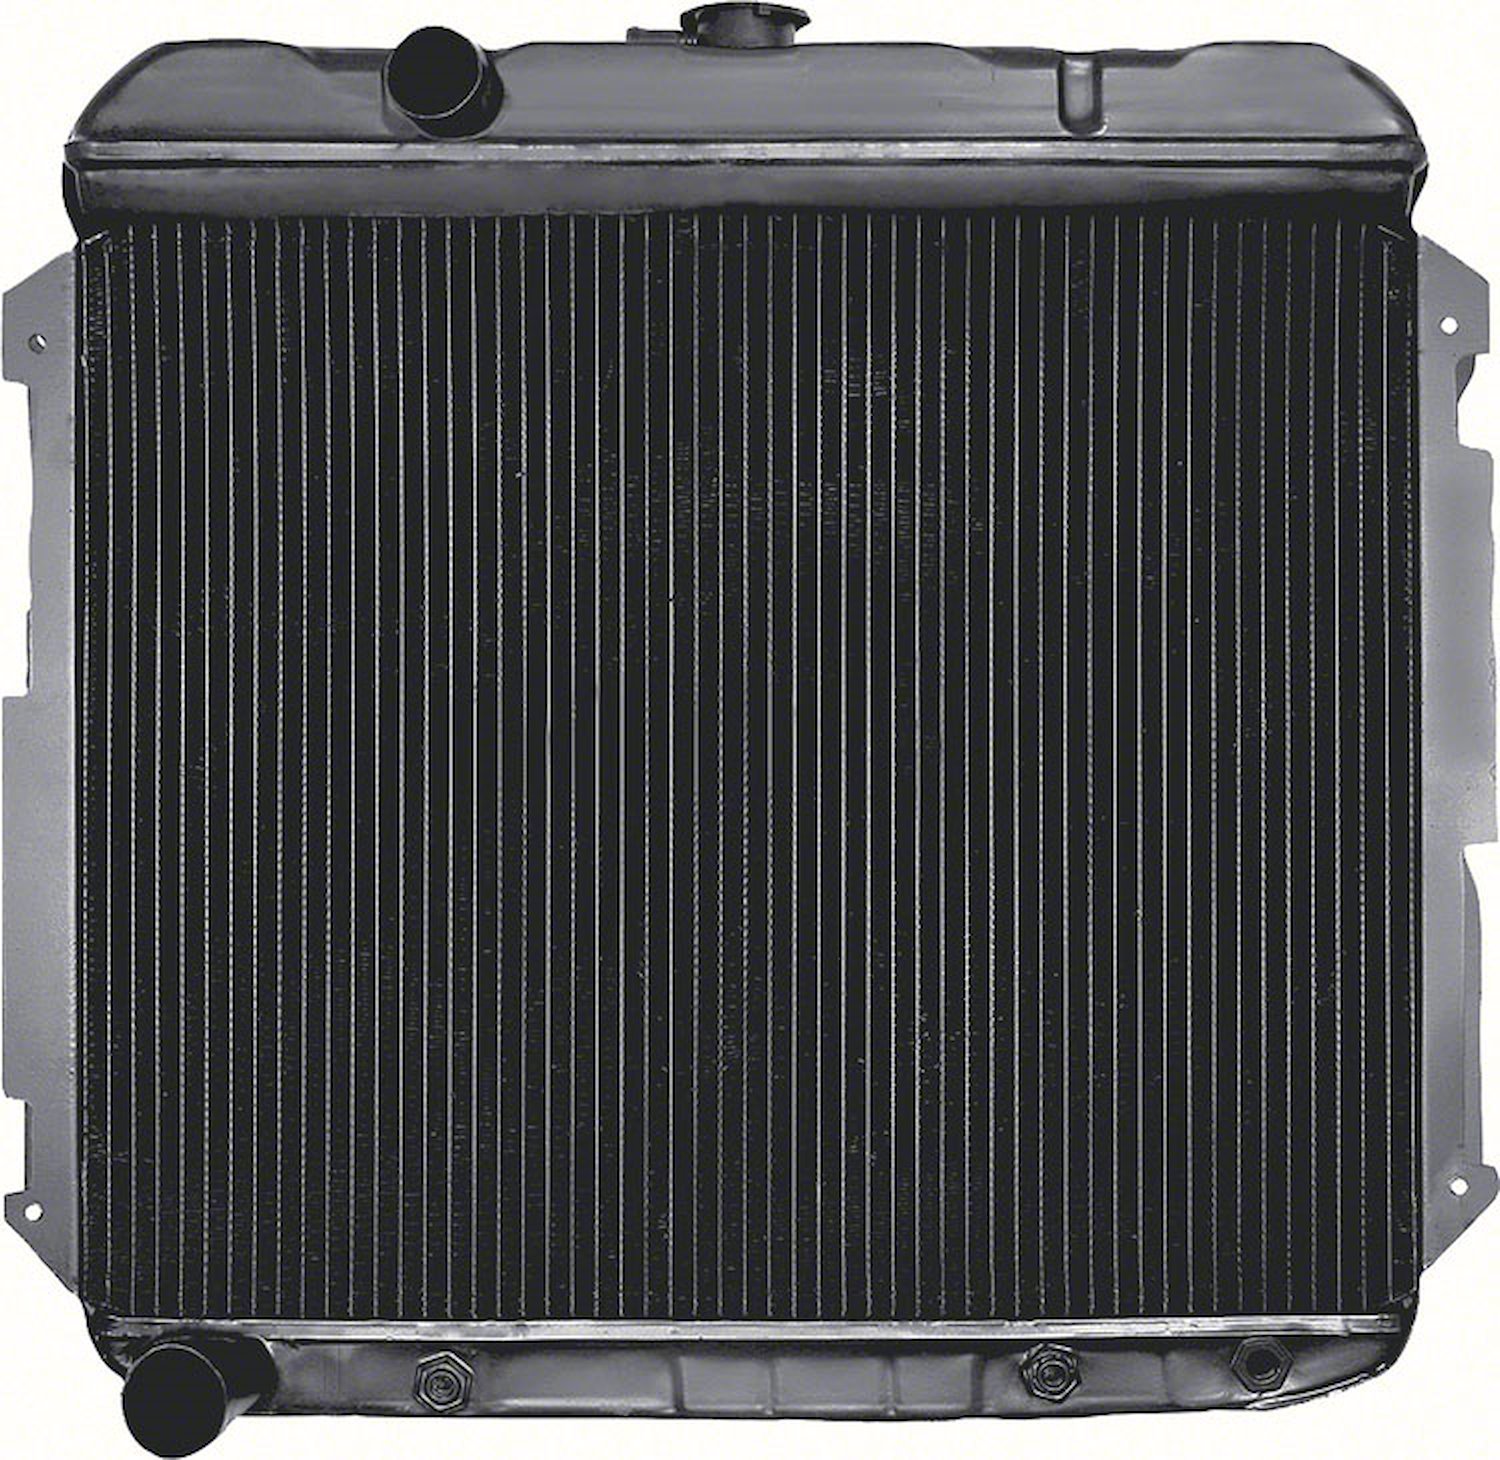 MB2369A Replacement Radiator 1966-69 Mopar B-Body Big Block V8 Exc Hemi With Automatic Trans 3 Row 22" Wide